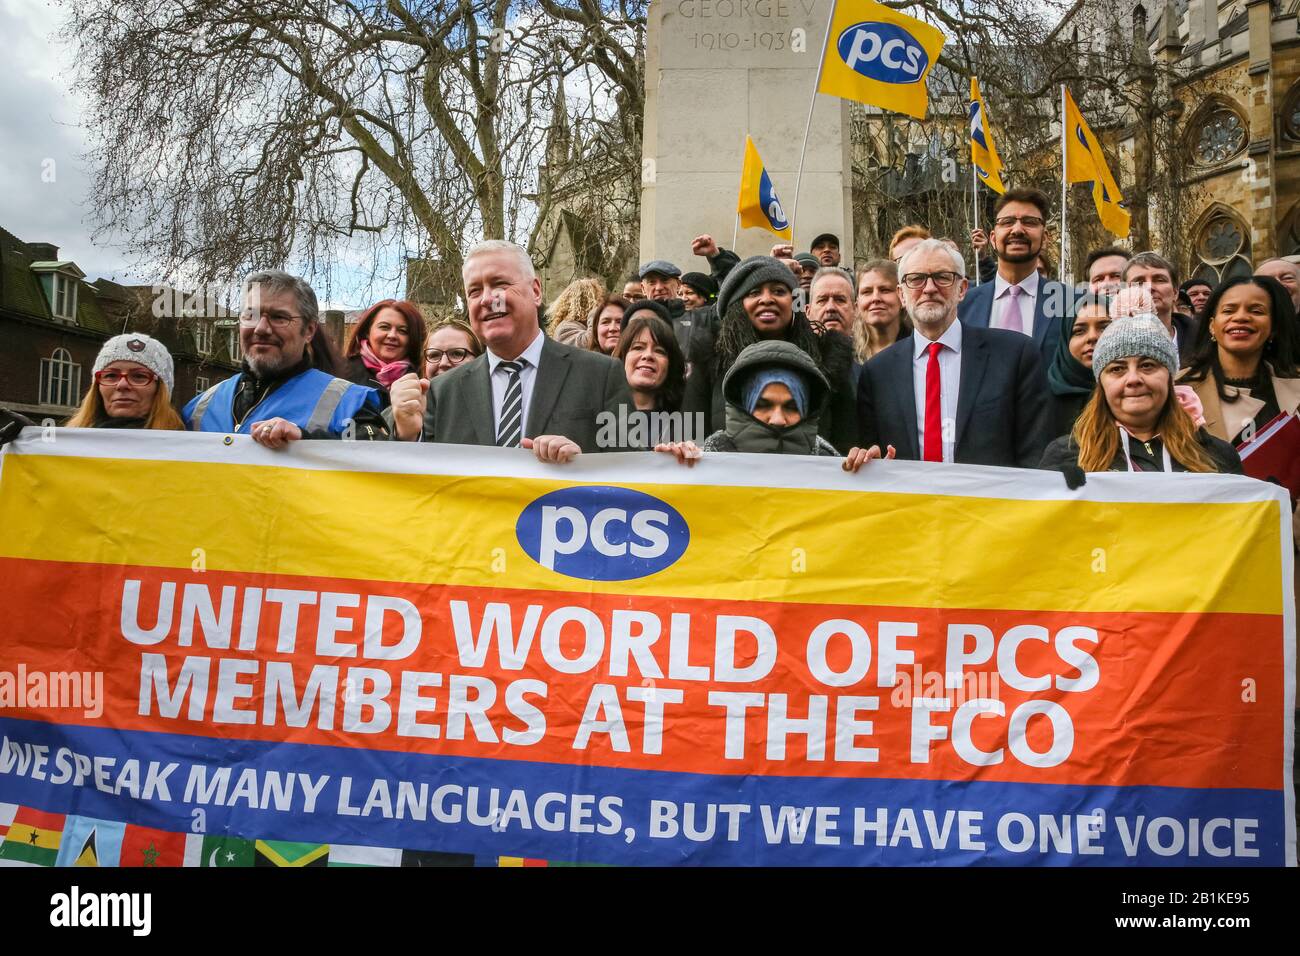 Westminster, London, UK. 26th Feb, 2020. Labour Leader Jeremy Corbyn, as well as John Mc Donnell, Dawn Butler, and Labour Chairman Ian Lavery and others speak at a protest organised by the PCS (Public and Commercial Services Union) supporting striking Interserve Workers. Outsourced facilities management workers at the Foreign and Commonwealth Office (FCO) in London began their strike period in November, because Interserve are not willing to recognise PCS. Credit: Imageplotter/Alamy Live News Stock Photo